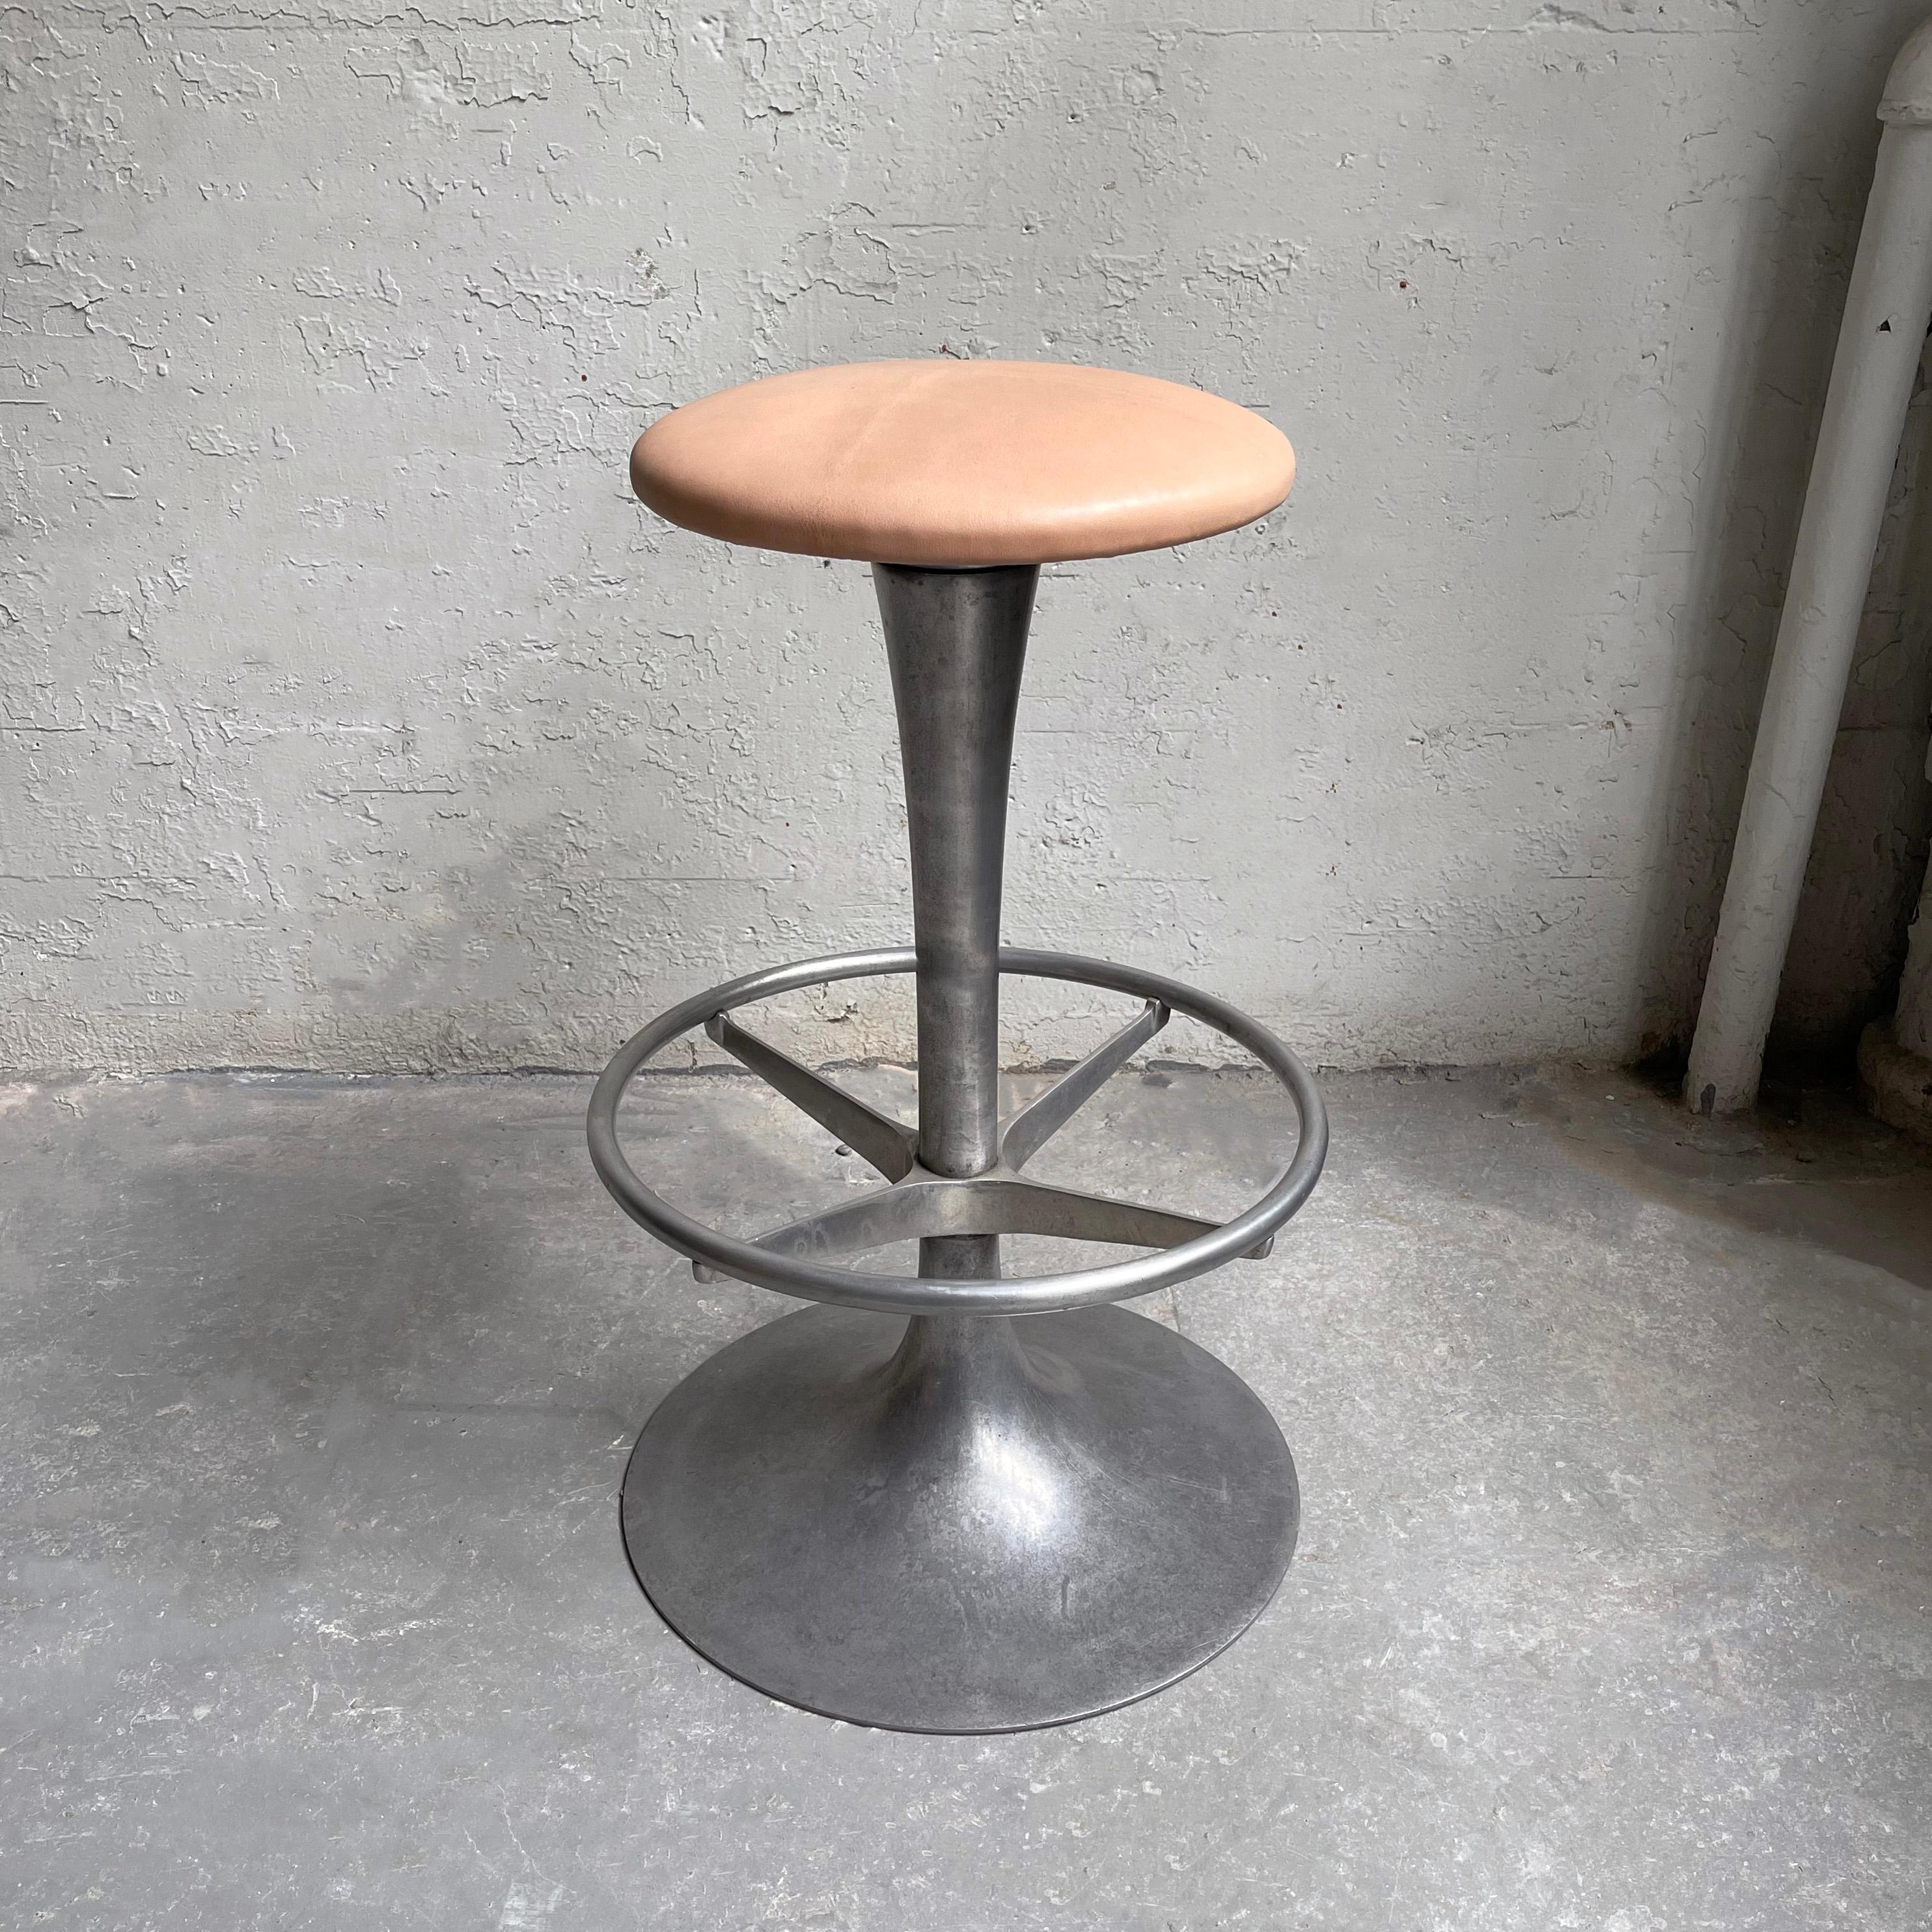 Tall, industrial stool features a brushed aluminum, tulip pedestal base with foot rest and 13 inch diameter blush leather seat.